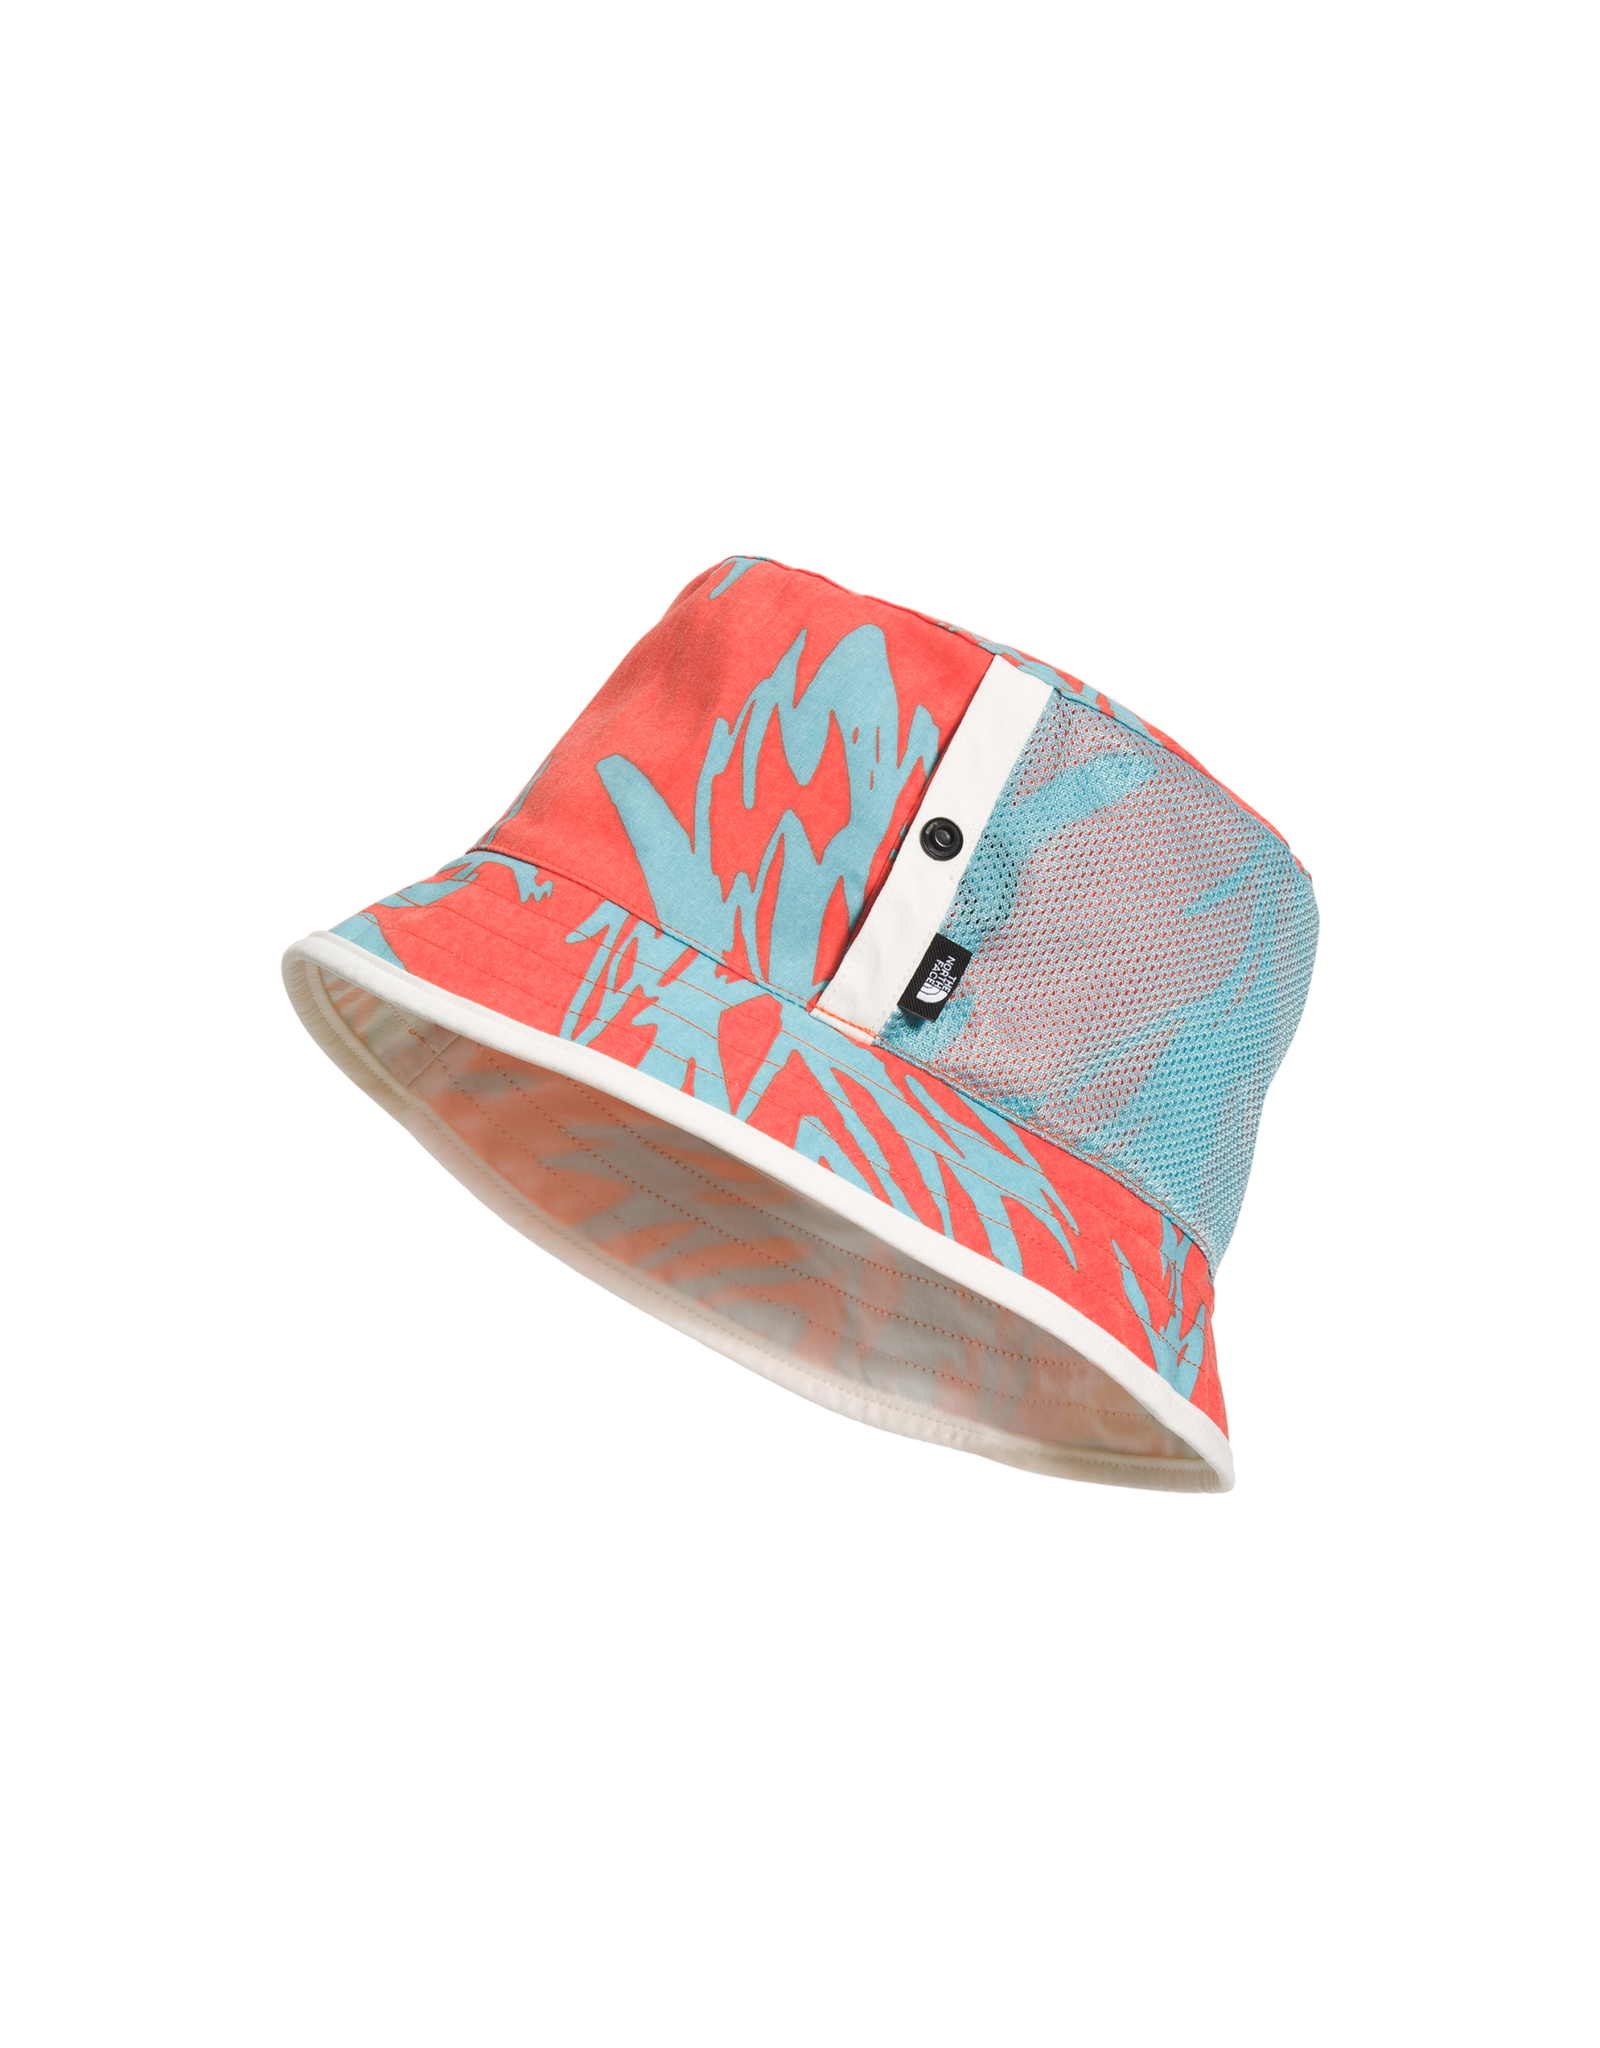 THE NORTH FACE CLASS V REVERSIBLE BUCKET HAT